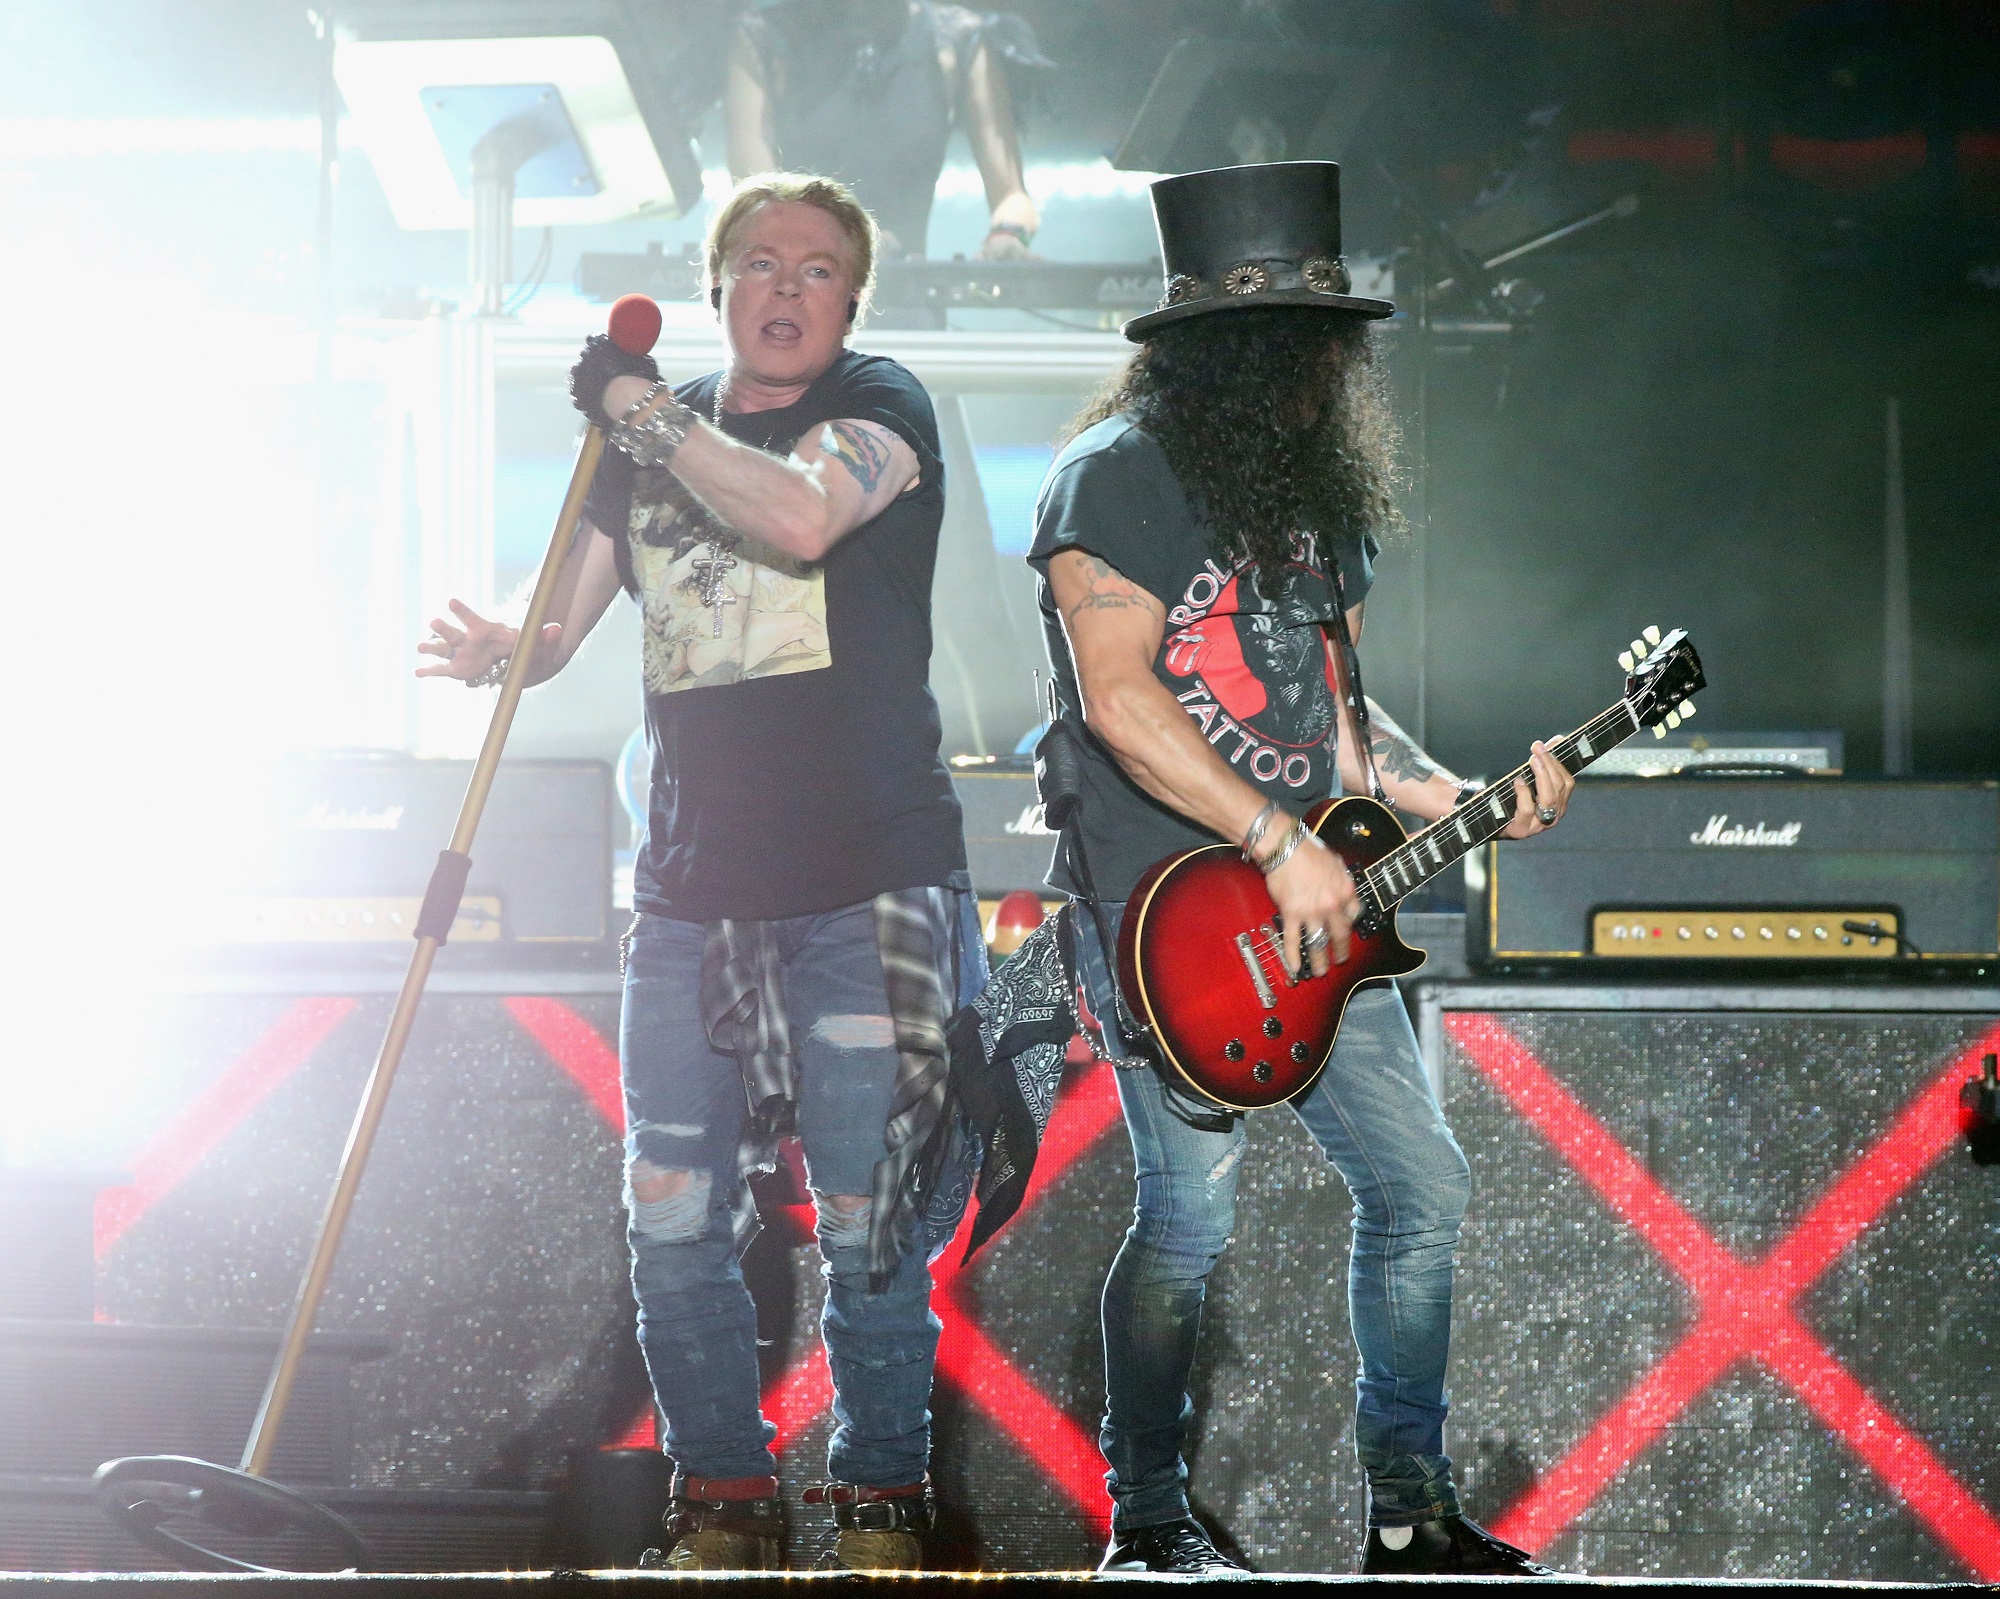 Axl and Slash of Guns N'Roses G N'R fame, onstage performing - the band just dropped a new song